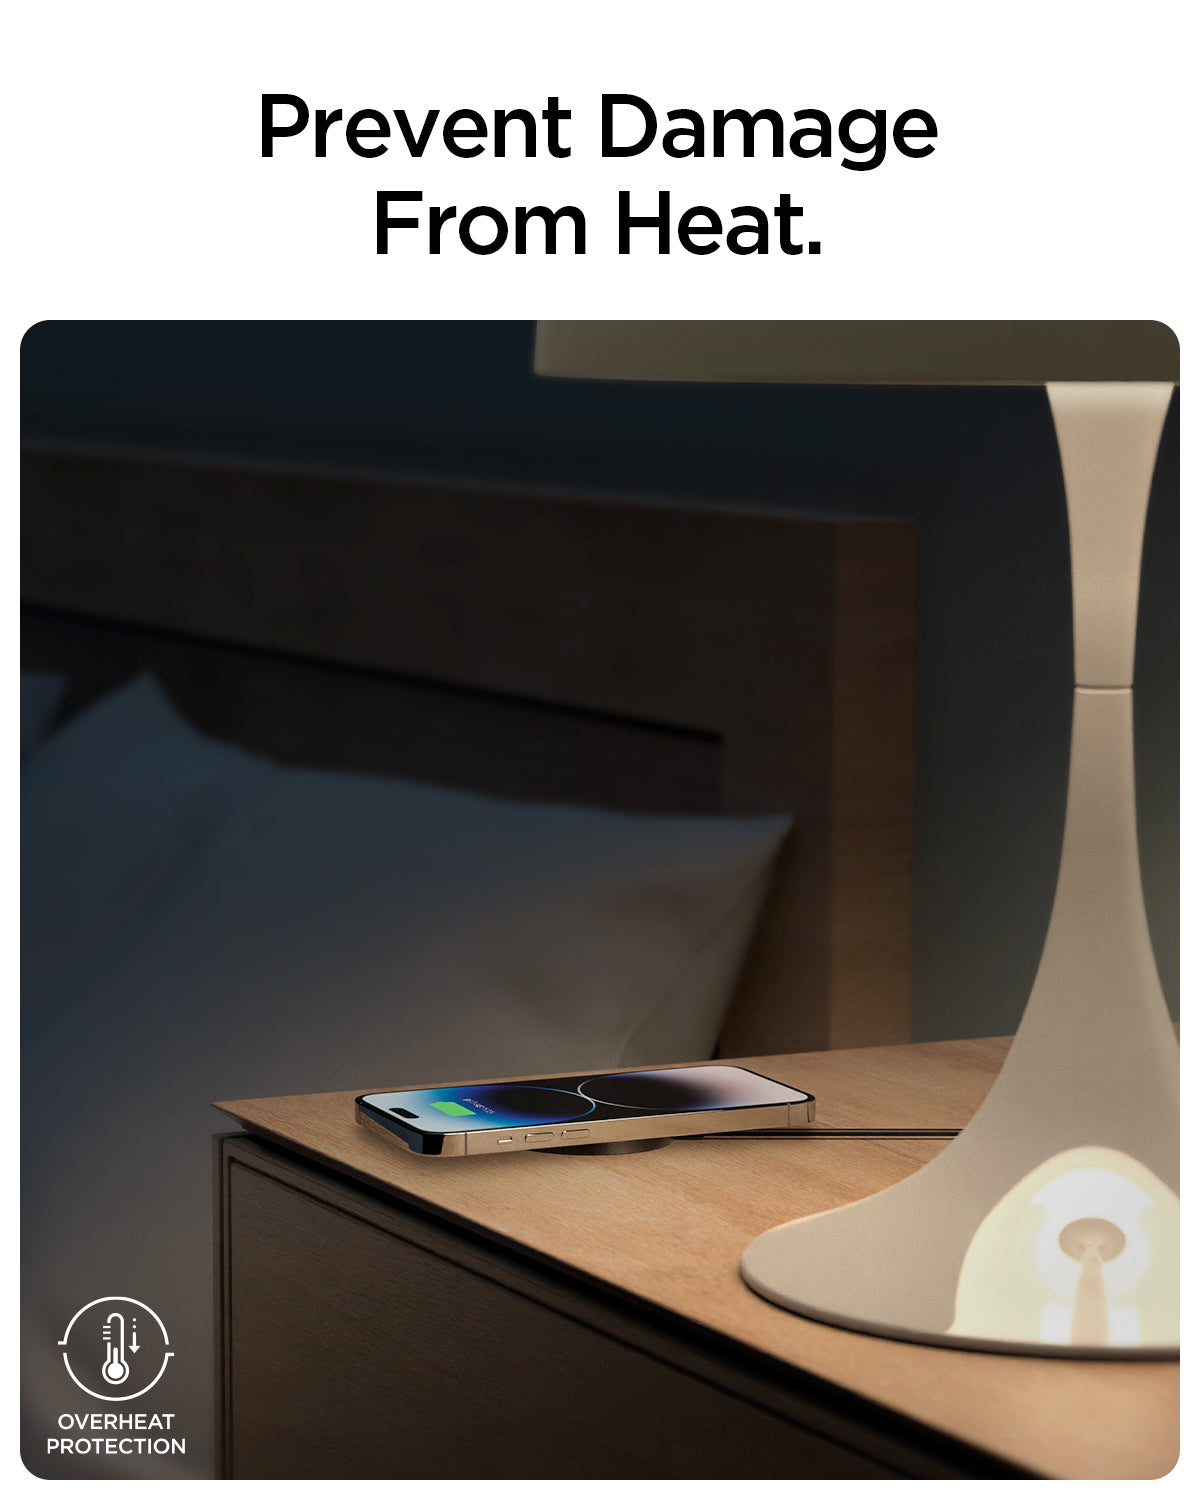 ACH04238 - ArcField™ Magnetic 7.5W Wireless Charger PF2101 (MagFit) in Black showing the Prevent Damage From Heat. A device attached to a wireless charger while under a table lamp